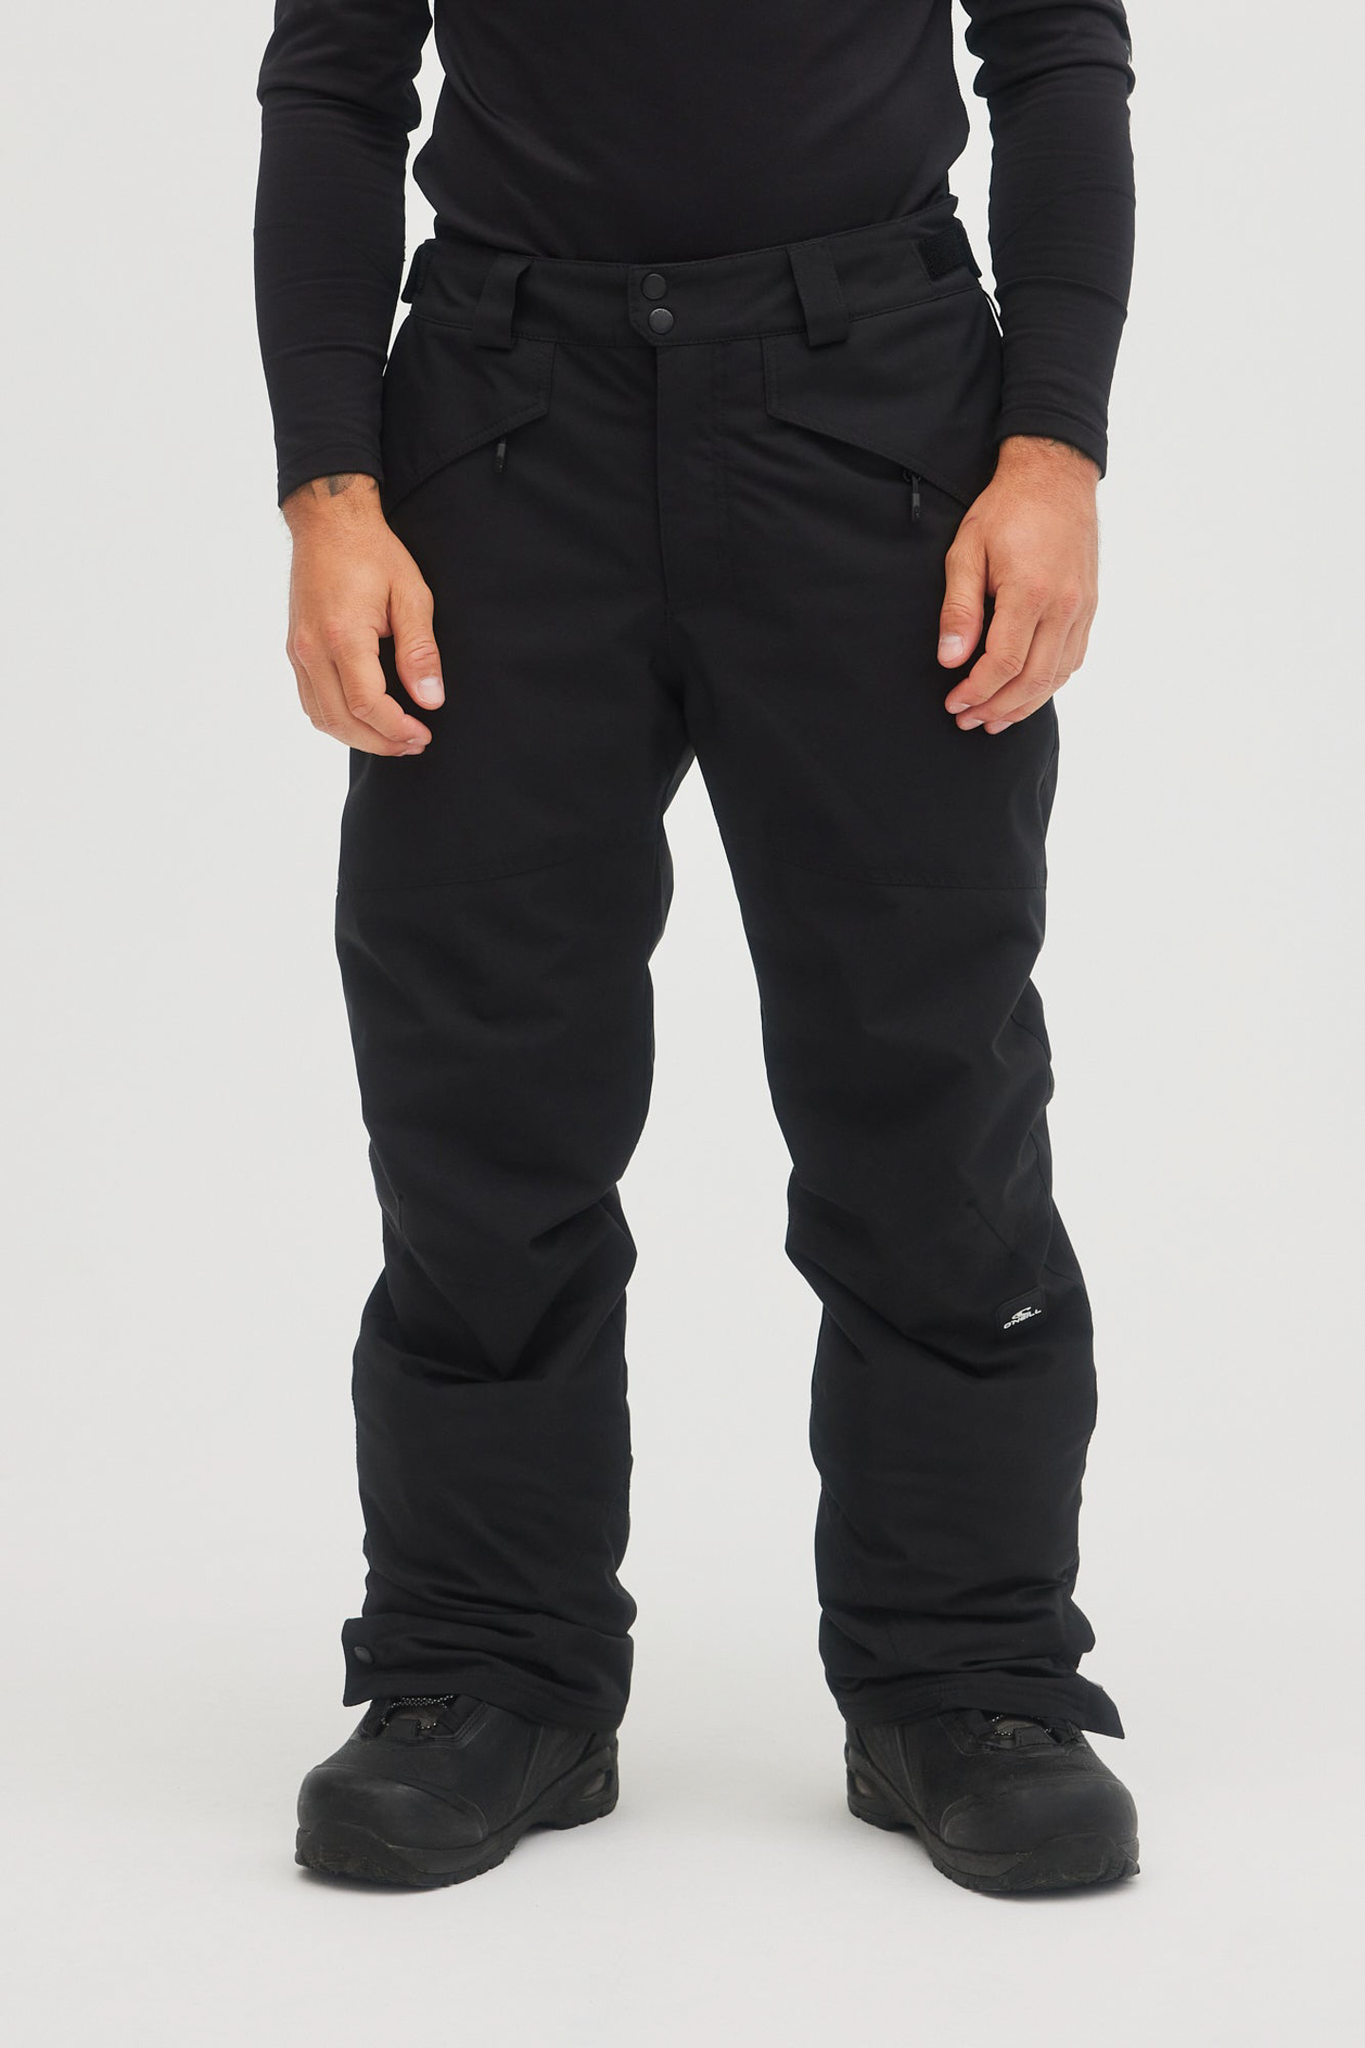 Out O\'Neill Insulated | Hammer Pants Black -